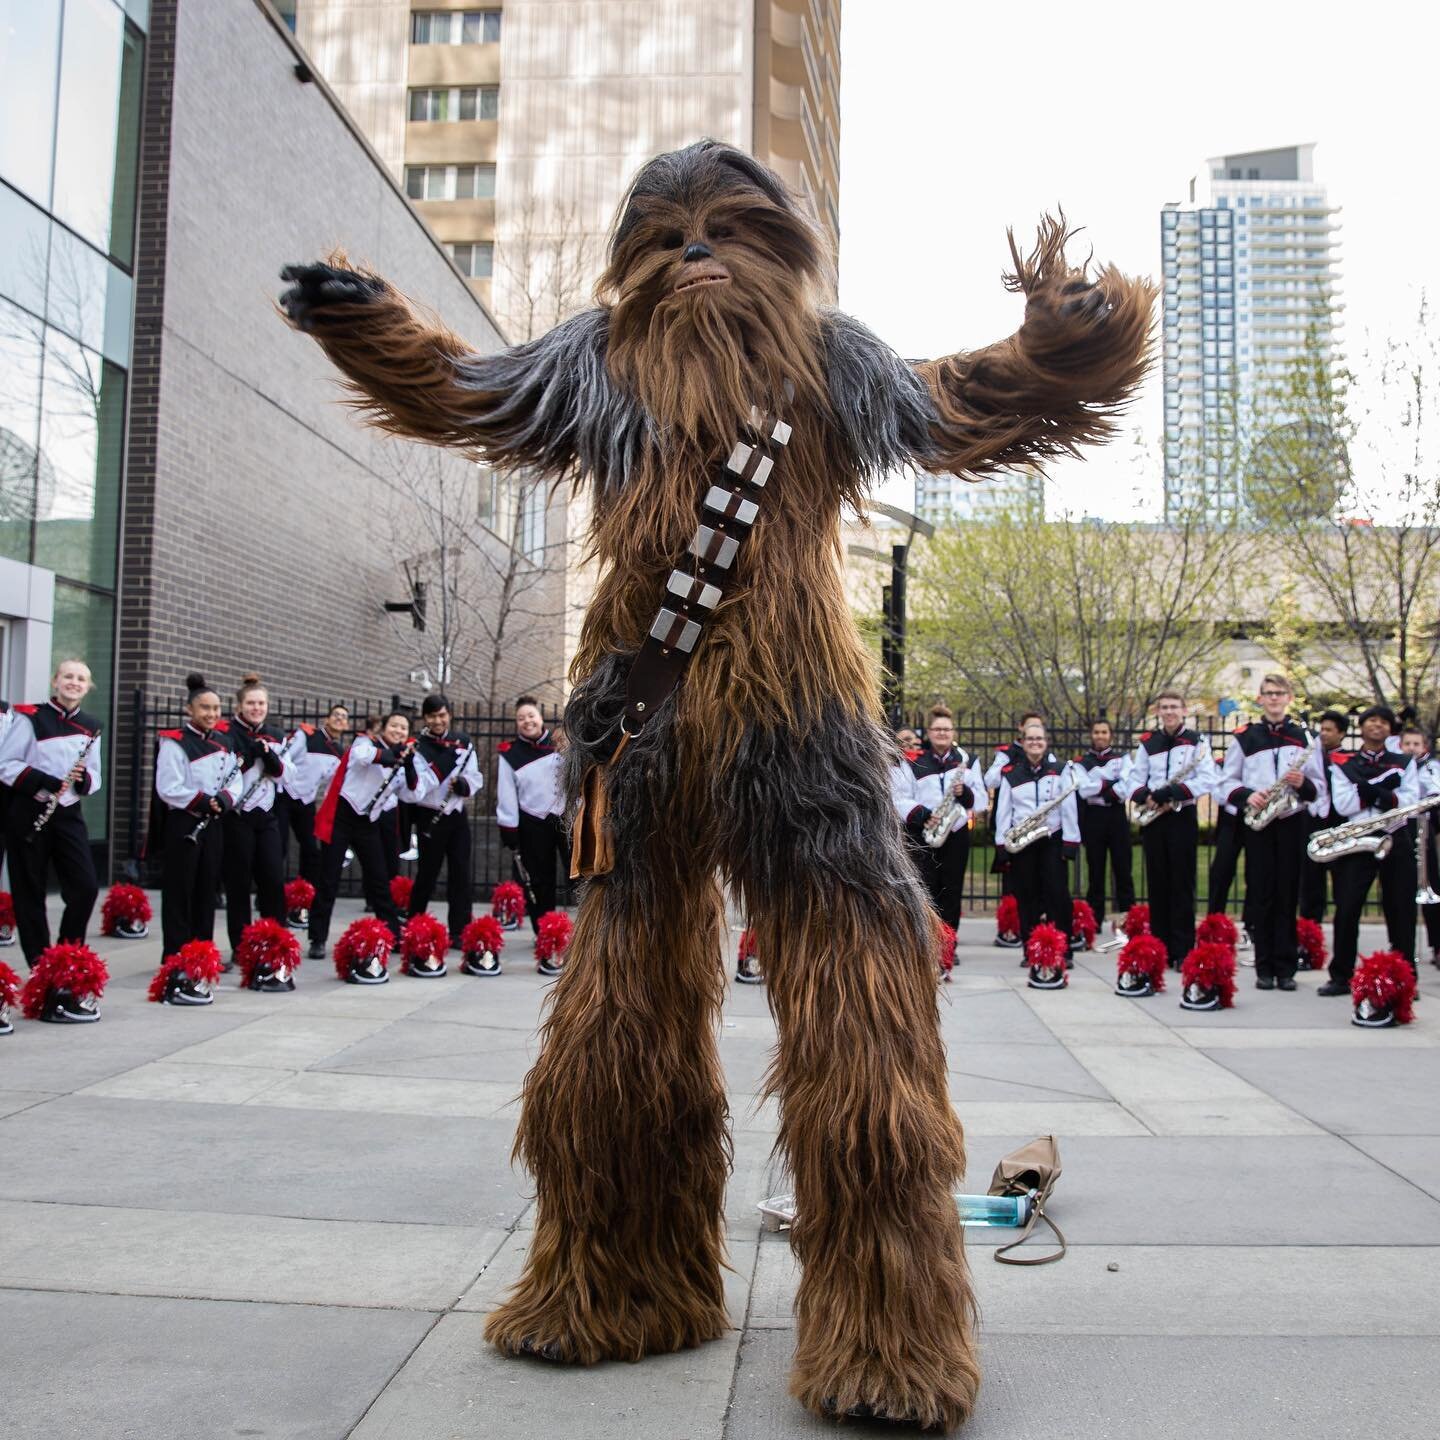 The @calgaryexpo #POWParade of Wonders is BACK! This year&rsquo;s parade will take place April 28, on Stephen Avenue. Details (and sign up!) can be found at calgaryexpo.com. Walk in the parade in costume alongside marching bands and Expo celebs, OR, 